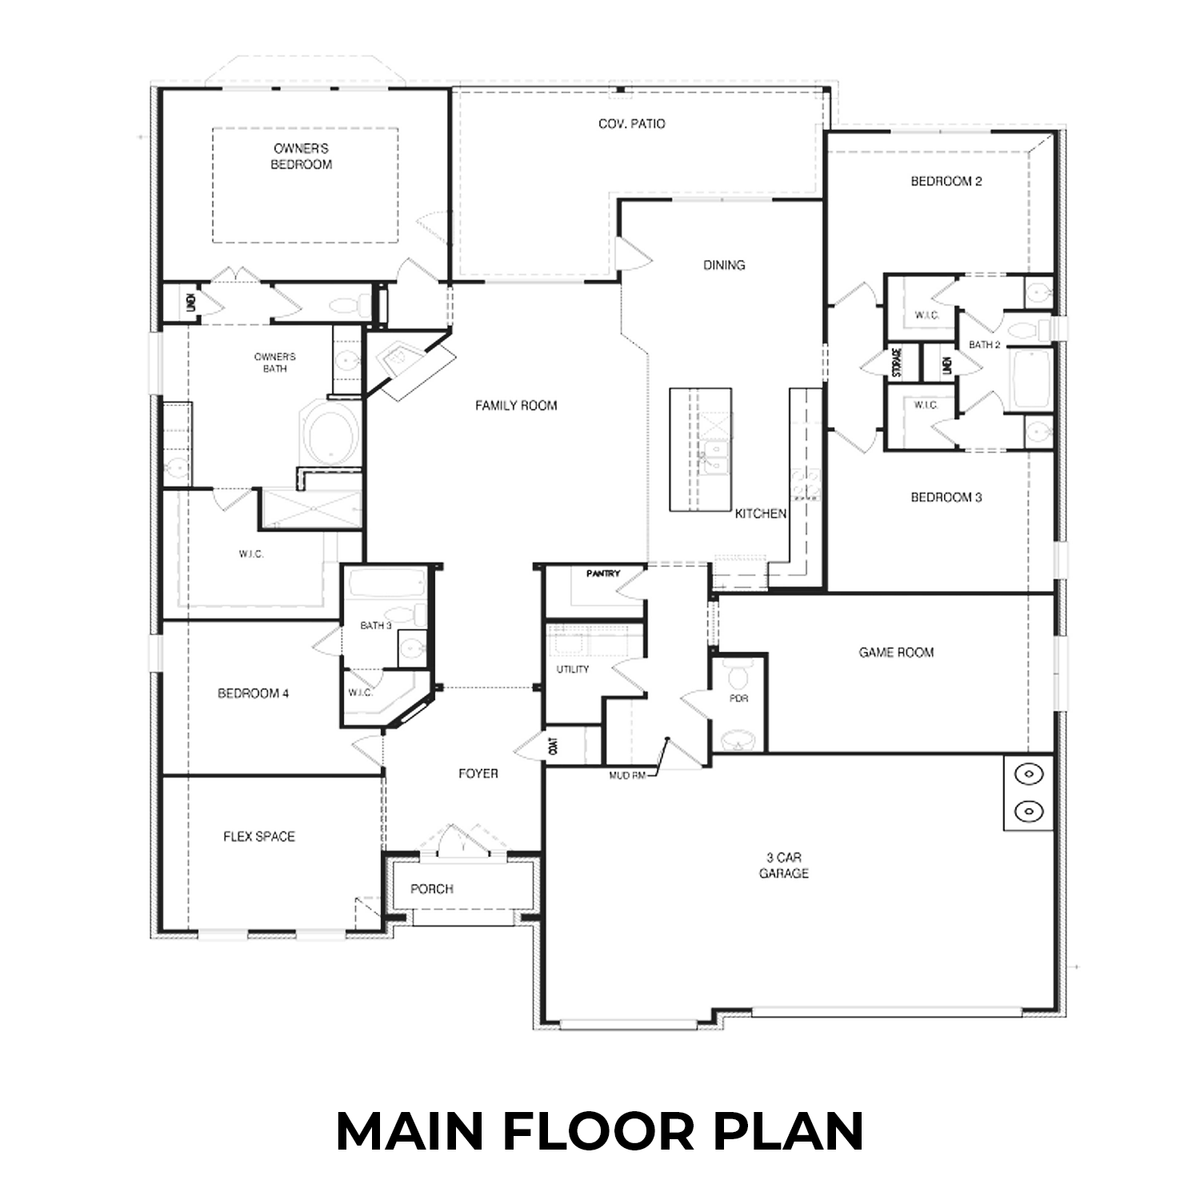 1 - The Garner A buildable floor plan layout in Davidson Homes' The Reserve at Potranco Oaks community.